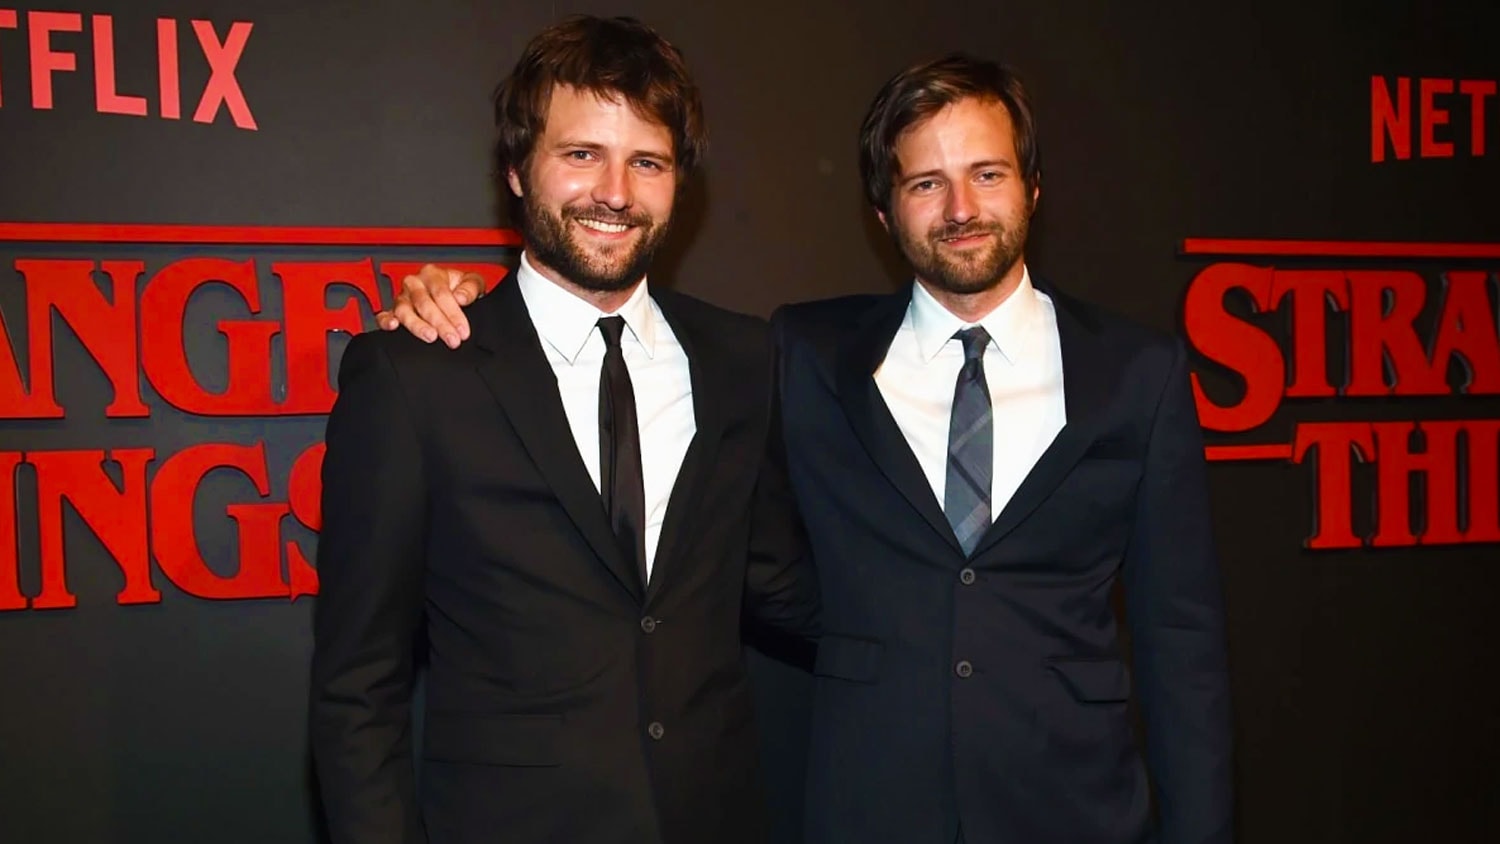 The-Duffer-Brothers-Stranger-Things-MCU-Ghost-Rider-Series